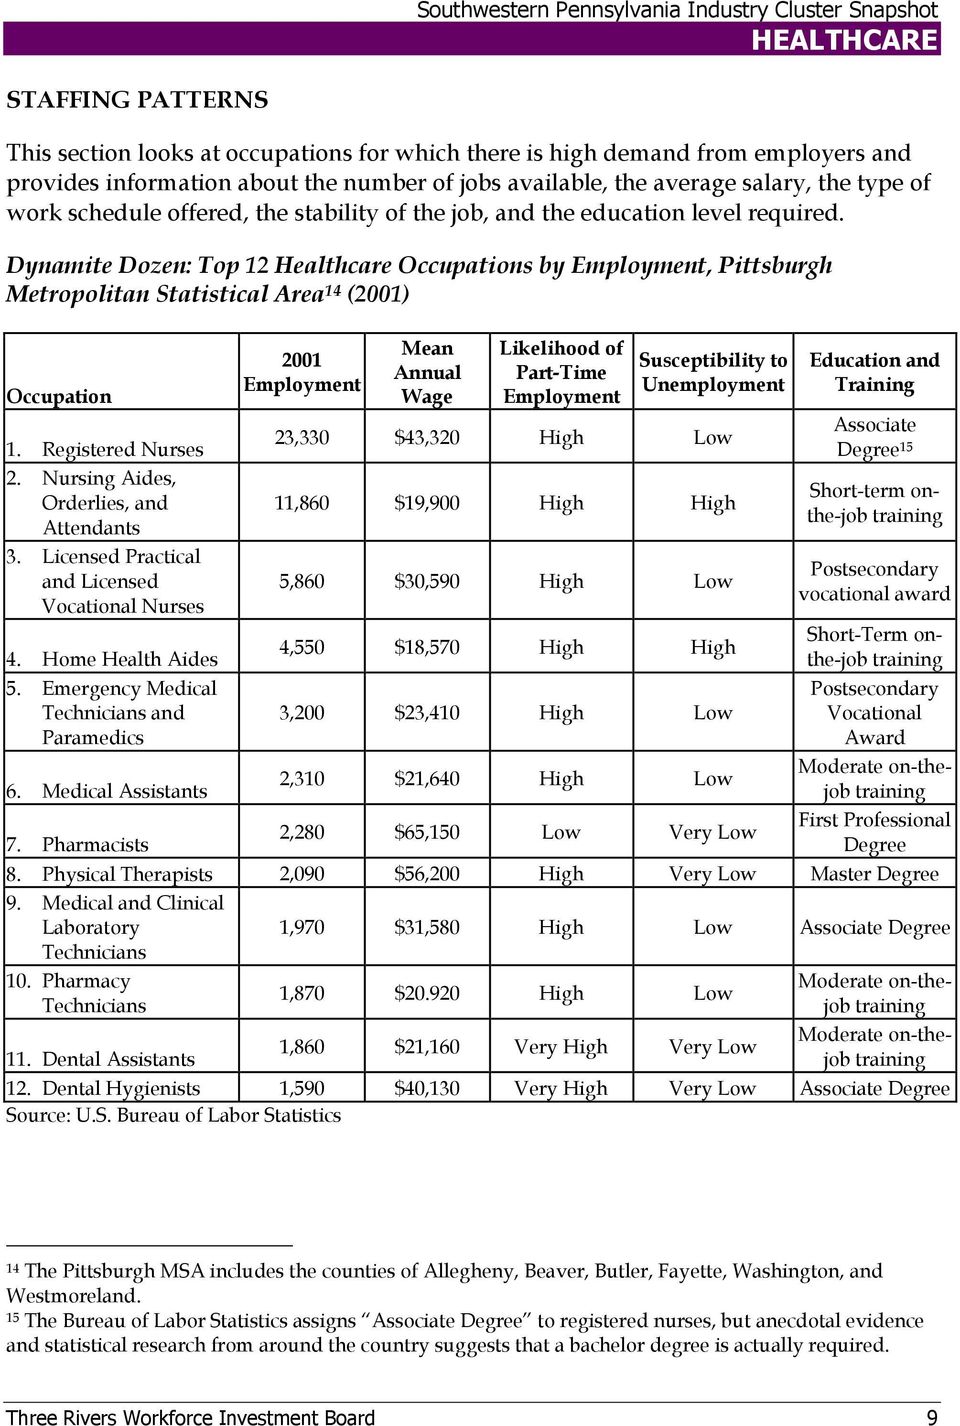 Dynamite Dozen: Top 12 Healthcare Occupations by Employment, Pittsburgh Metropolitan Statistical Area 14 (2001) Occupation 1. Registered Nurses 2. Nursing Aides, Orderlies, and Attendants 3.